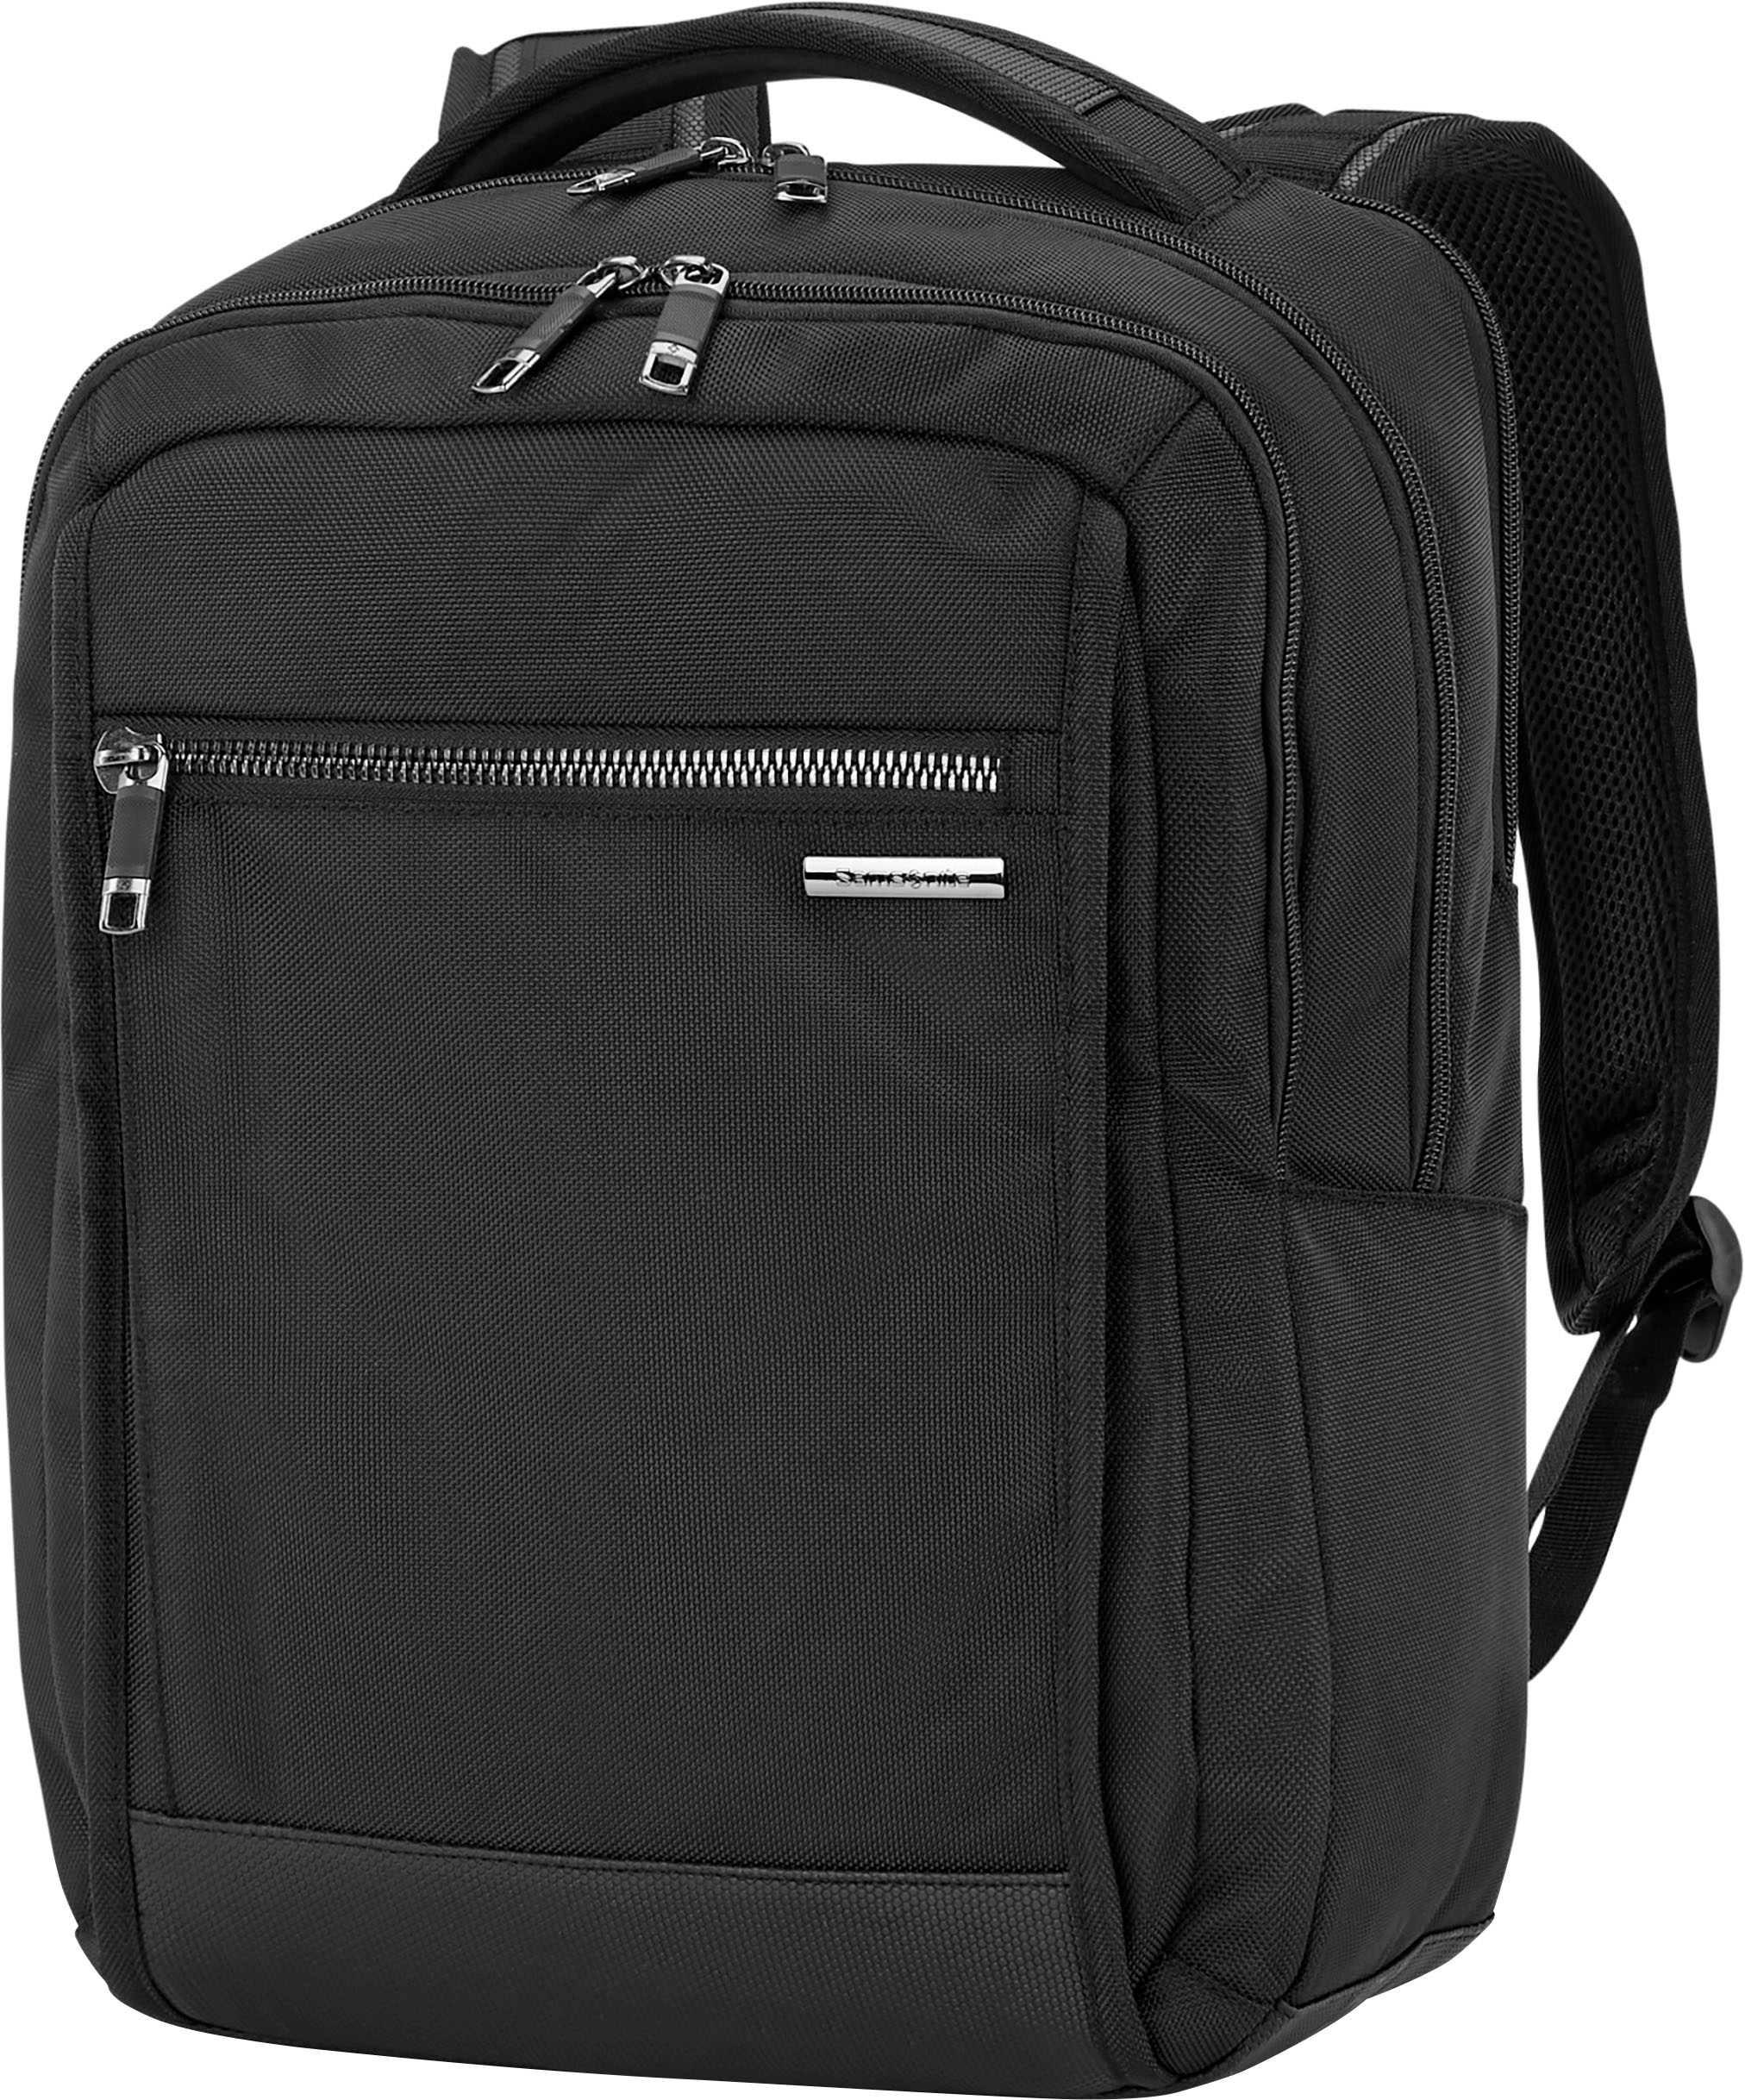 Bagpack Polyester Foam Heavy Travel Bag, Size/Dimension: 20